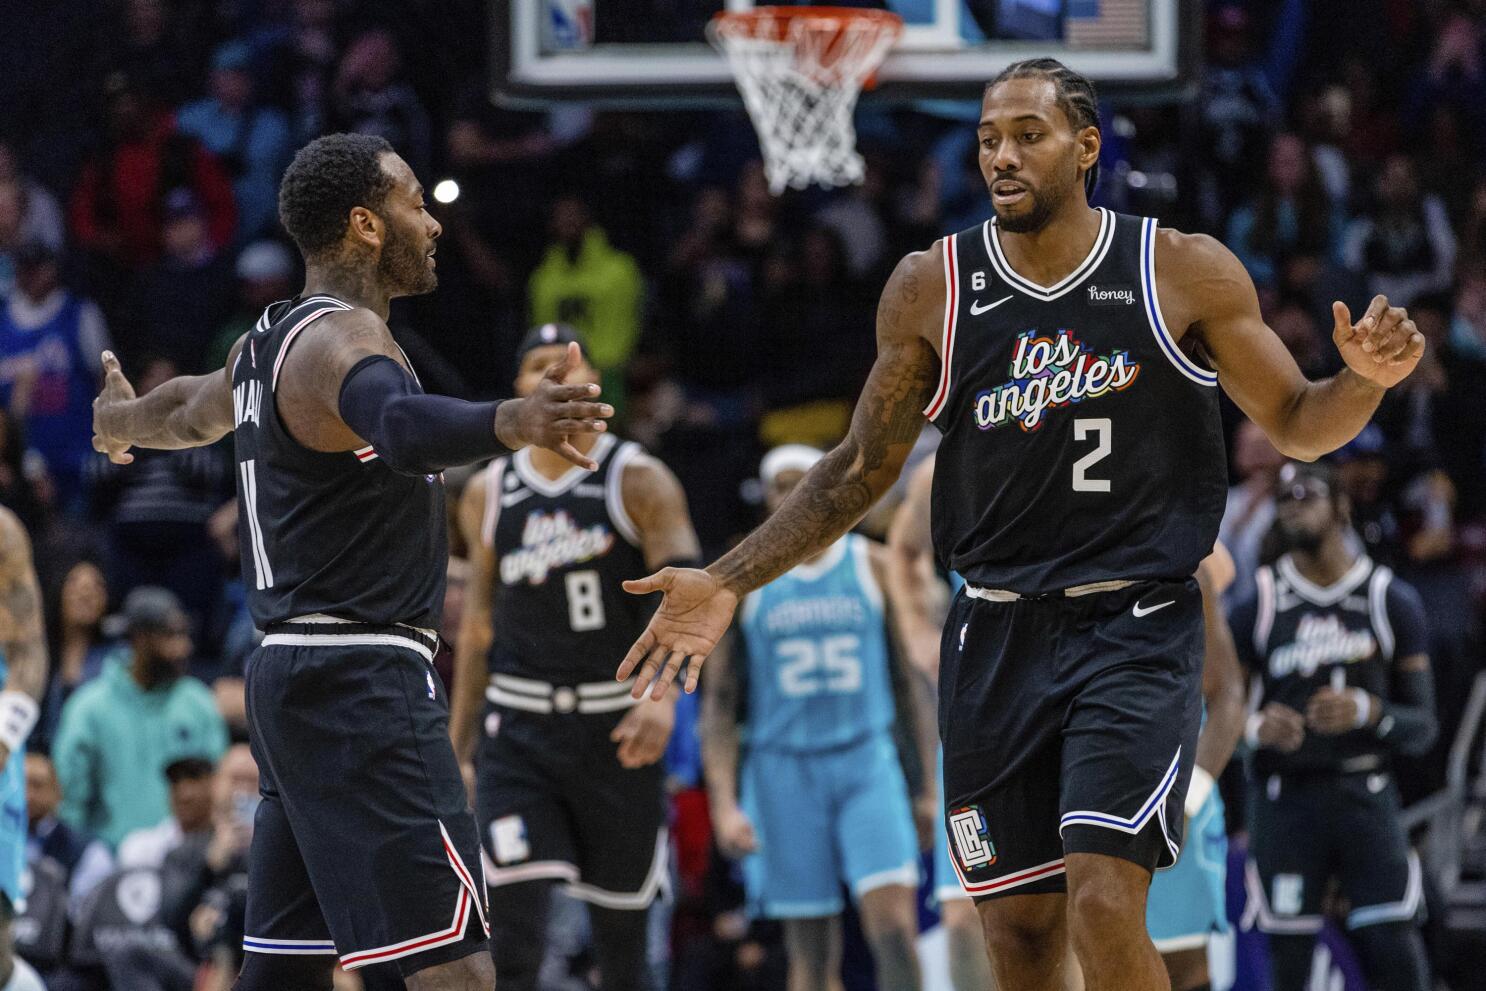 Clippers vs. Hornets: Play-by-play, highlights and reactions